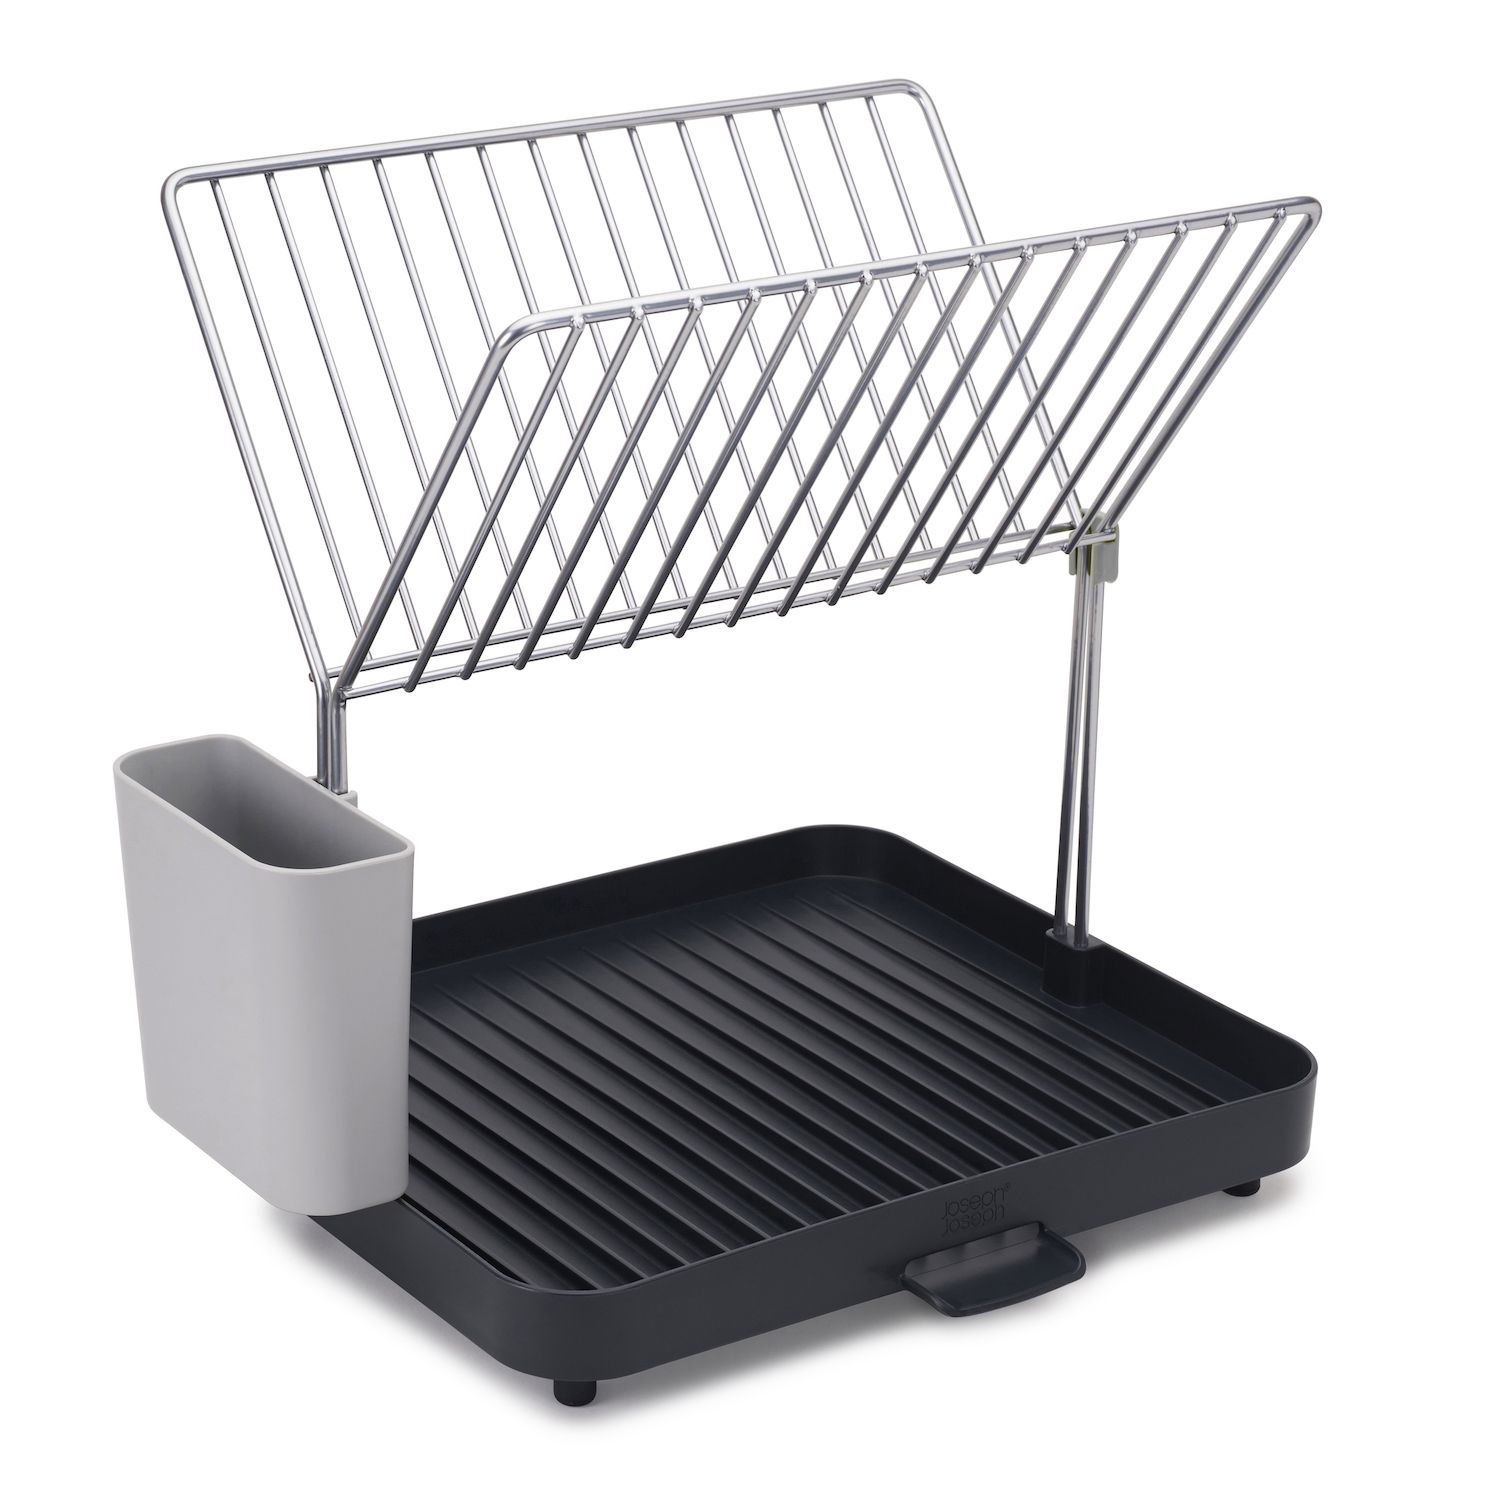 KitchenAid KNS896BXGRA Full Size Dish Drying Rack for sale online